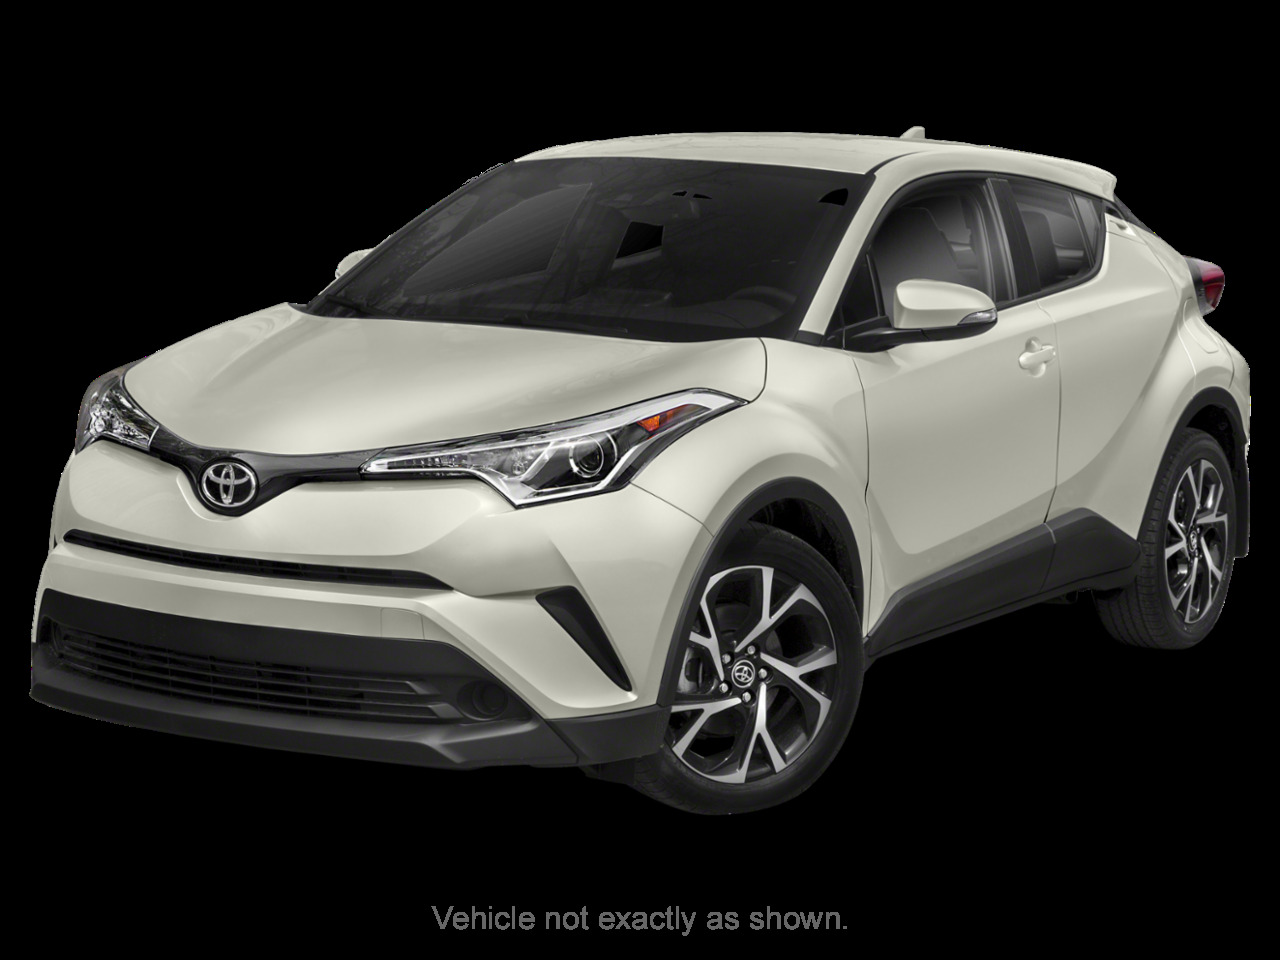 2018 Toyota C-HR XLE | XLE Model | Low Mileage | OpenRoad True Pric